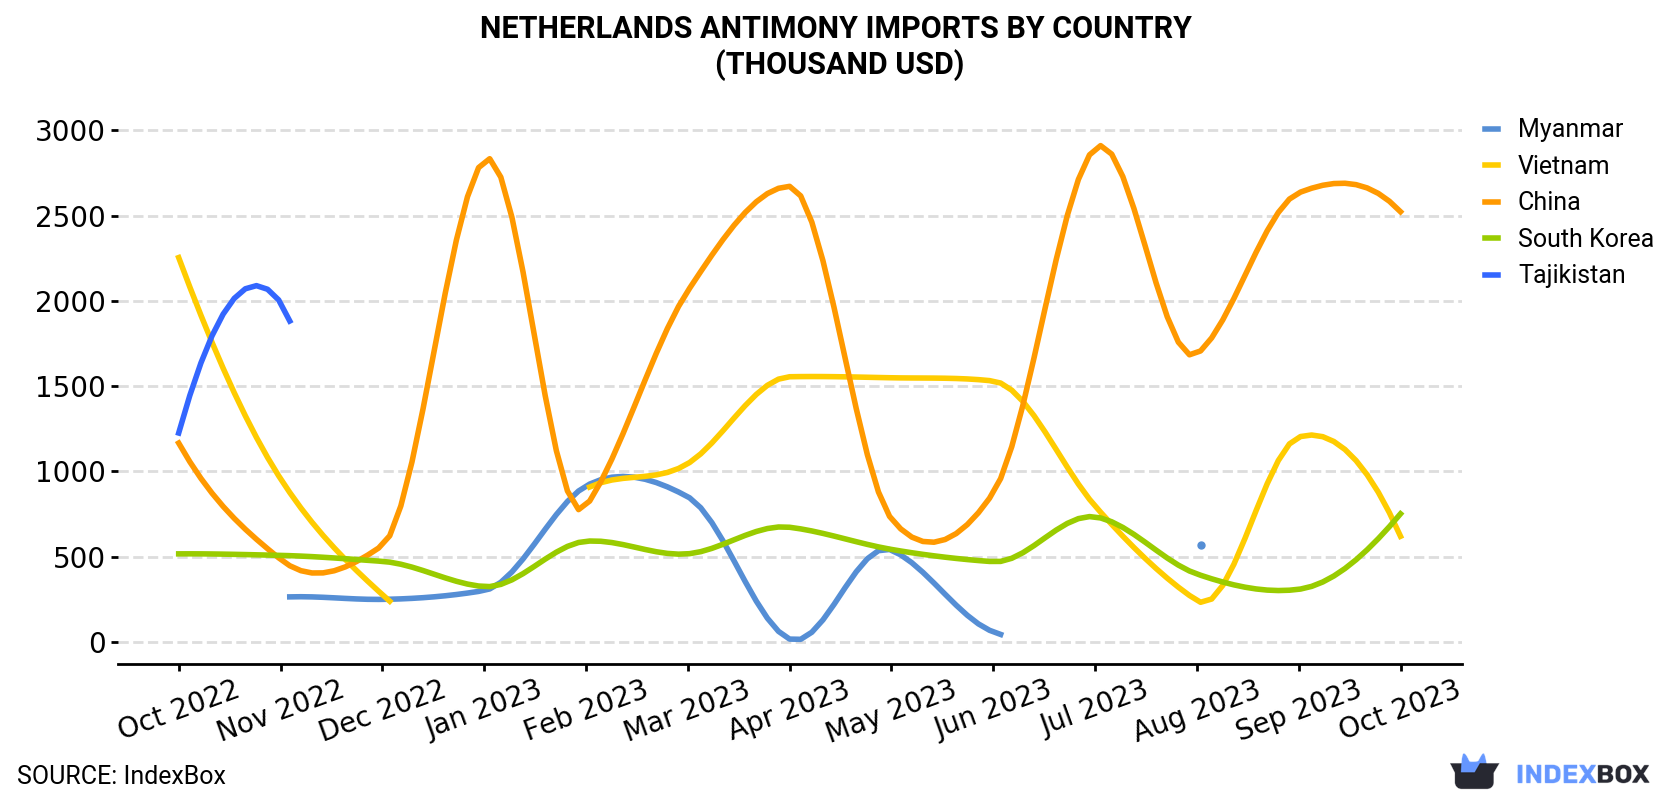 Netherlands Antimony Imports By Country (Thousand USD)